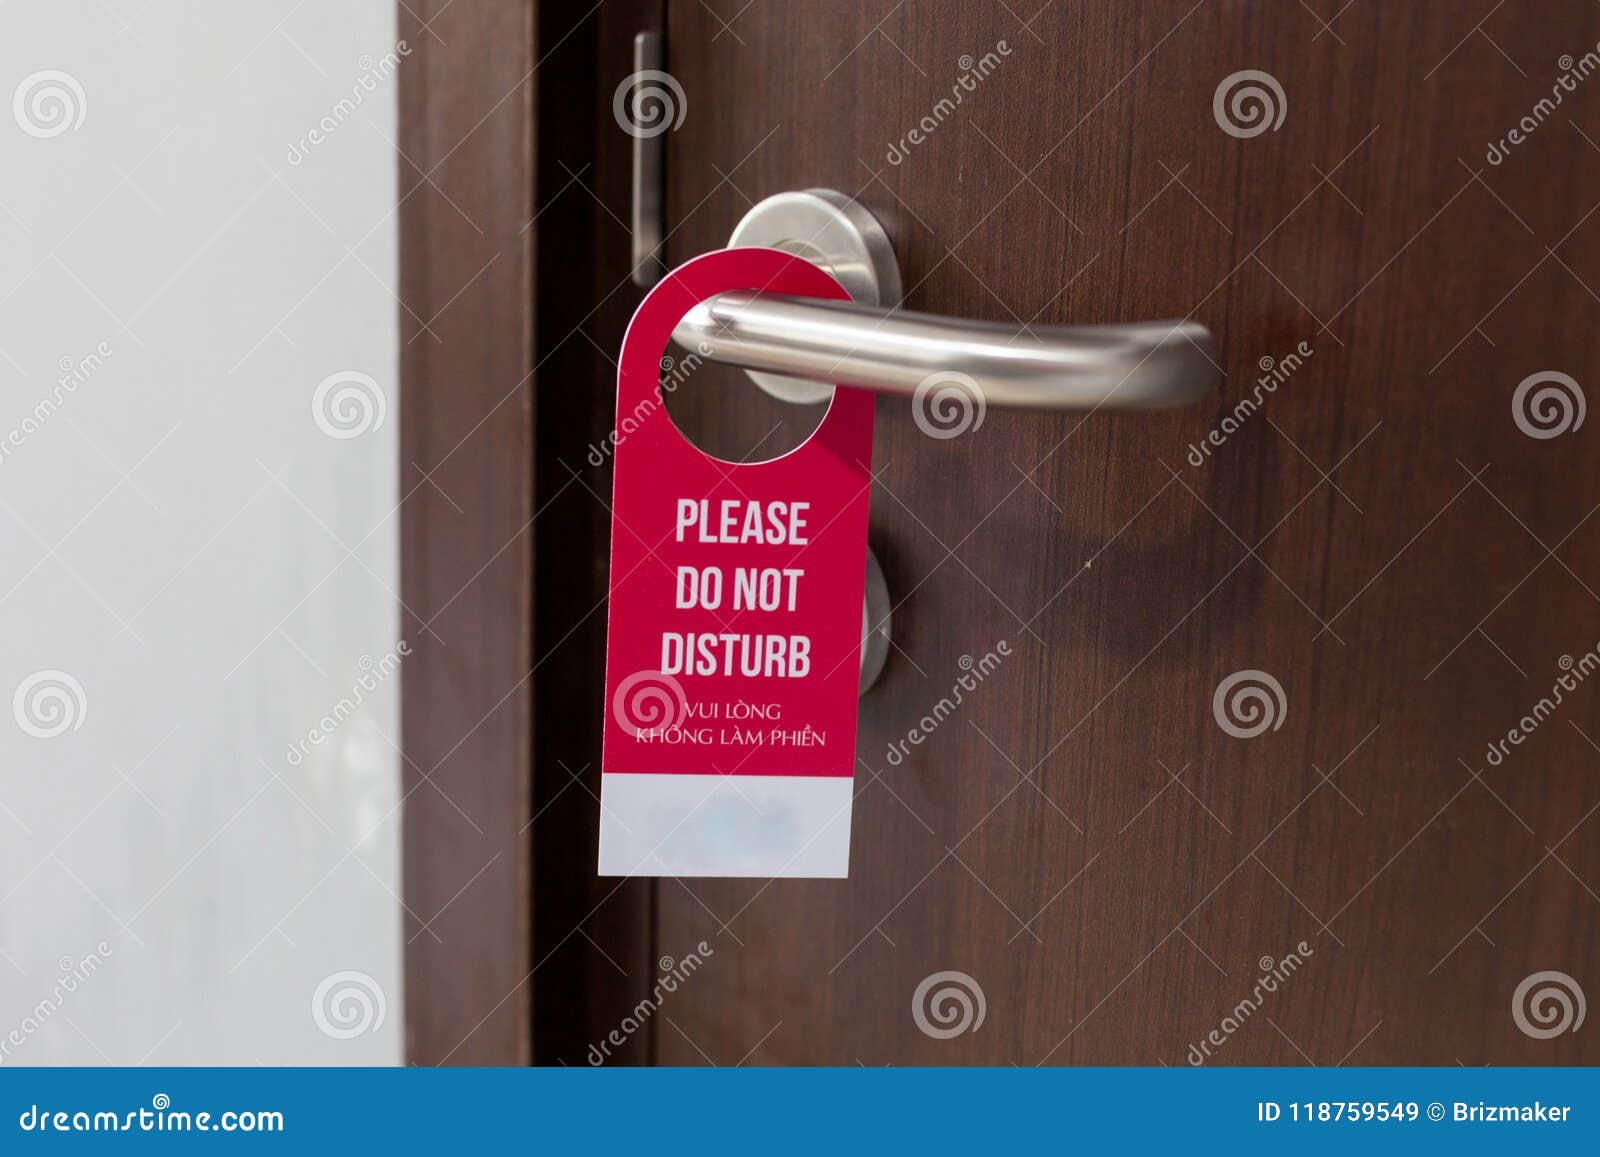 the hotel room with do not disturb sign on the door.